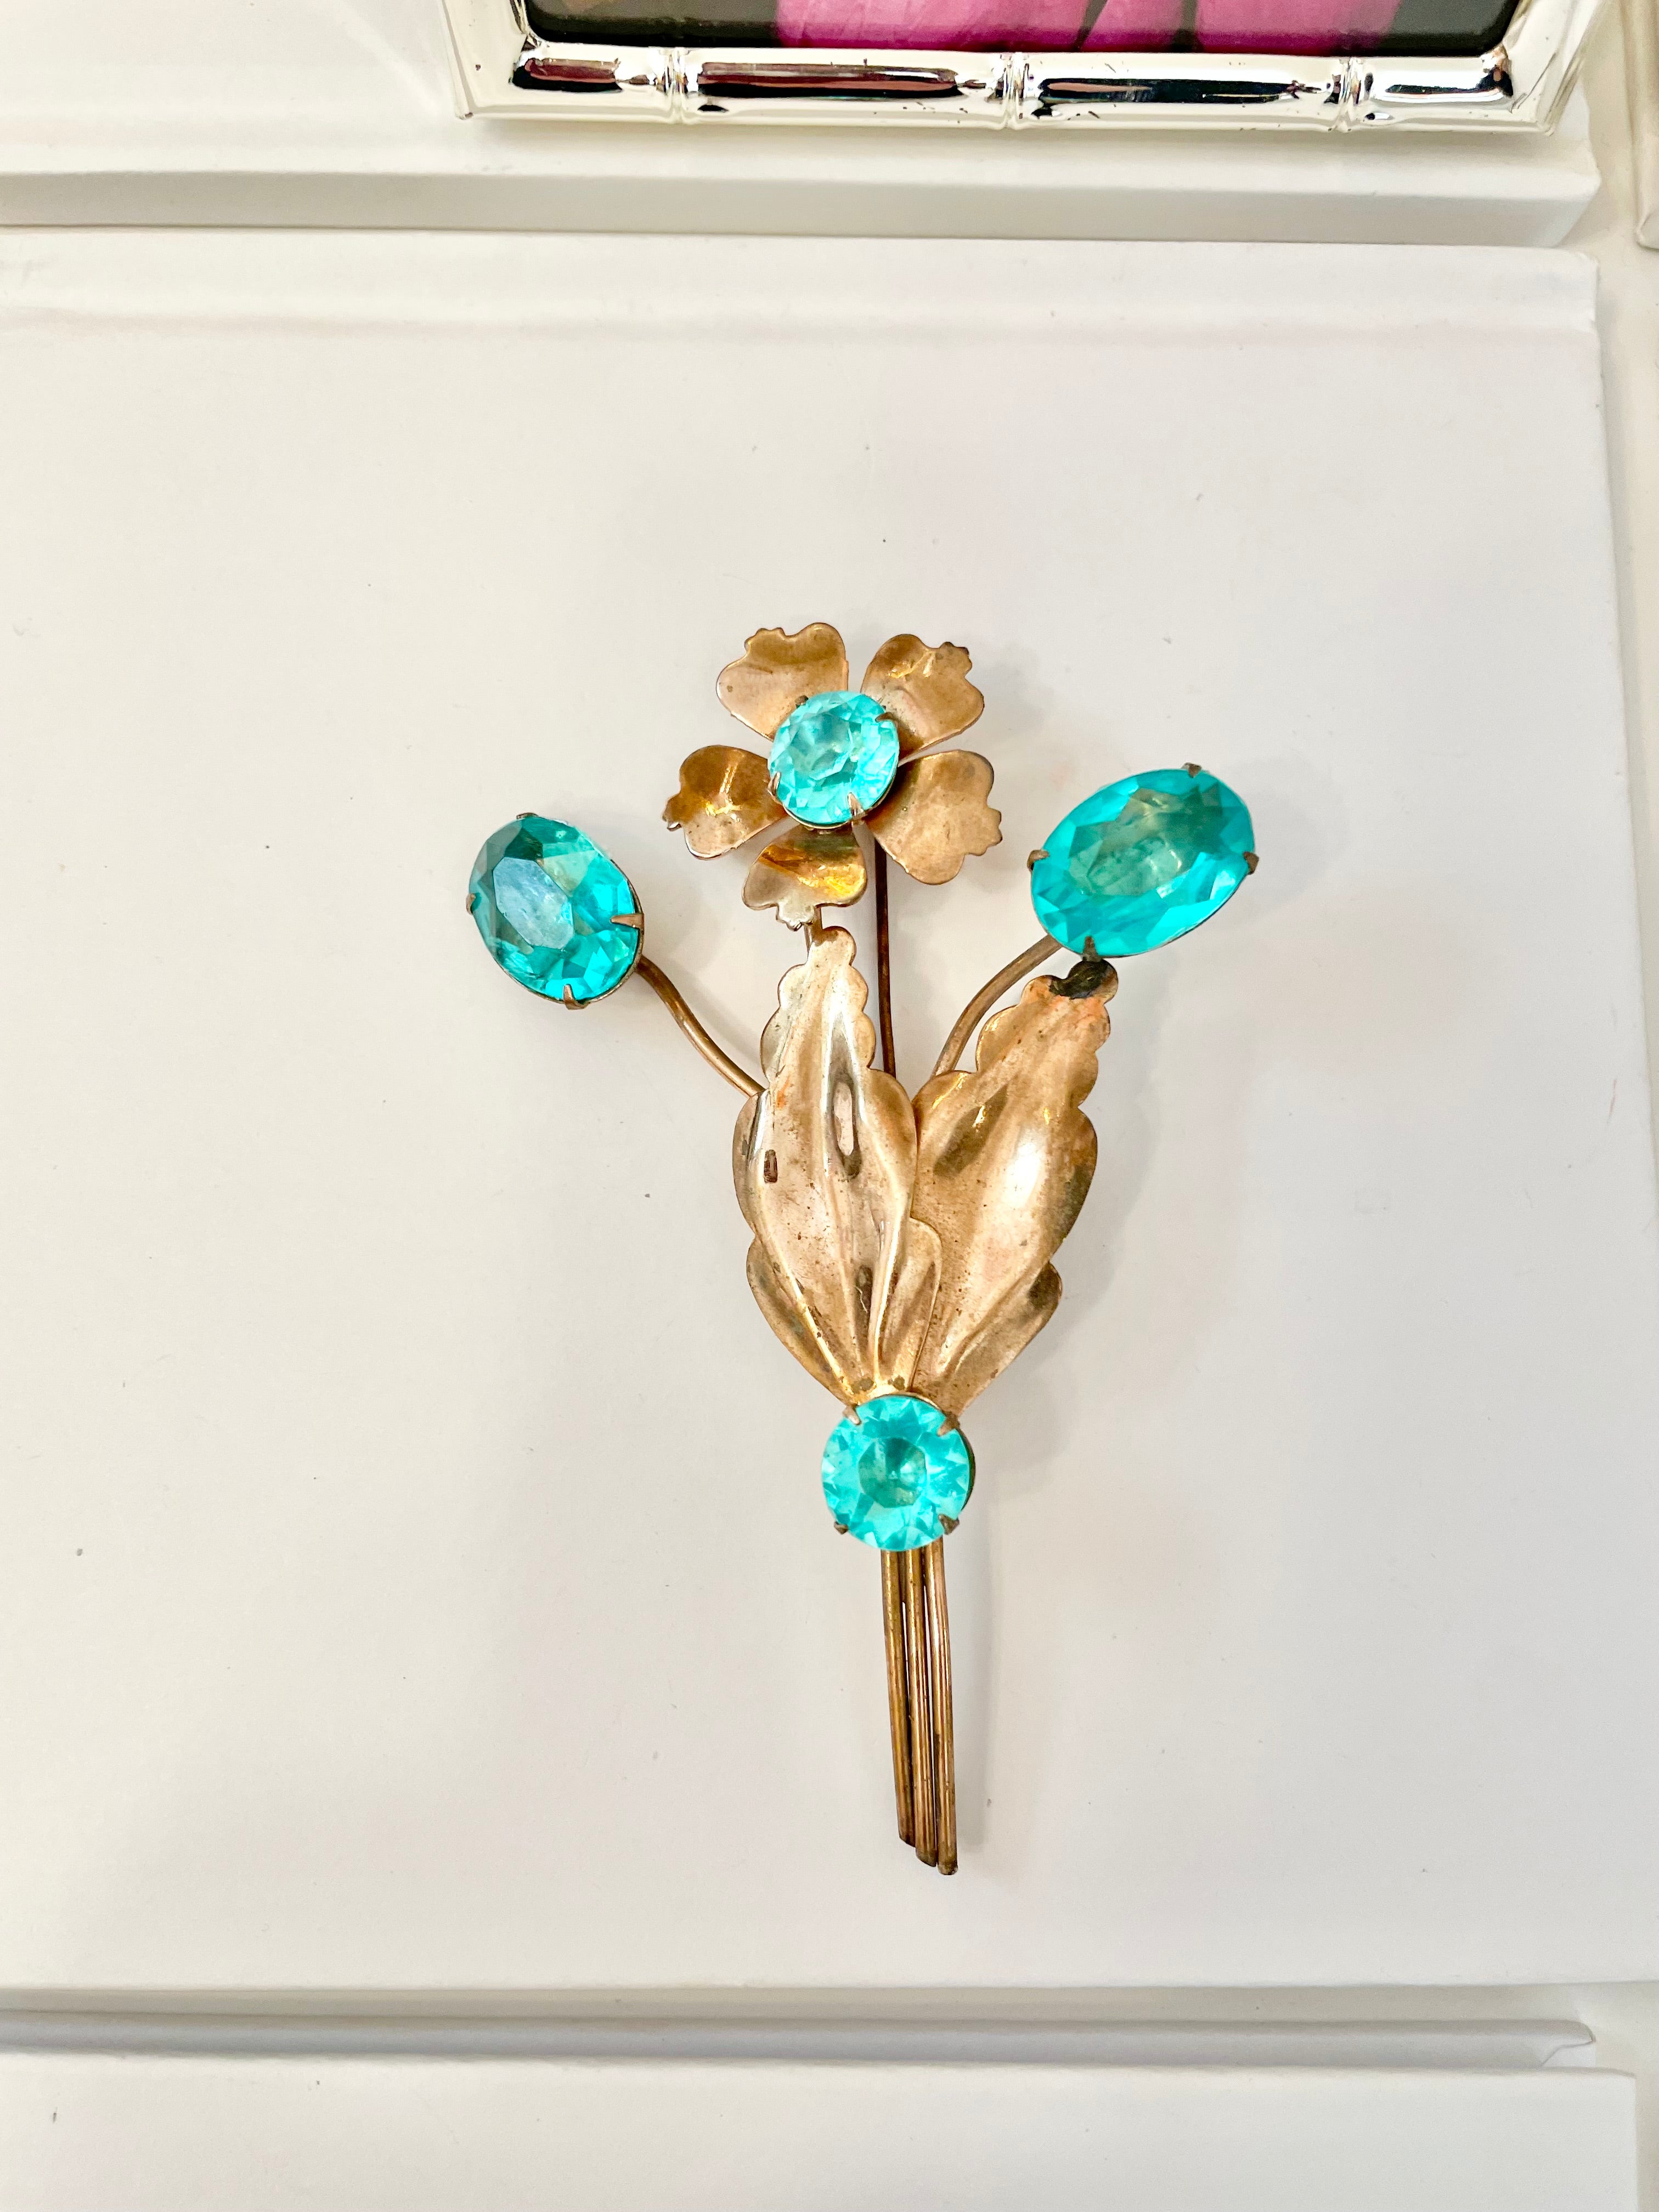 The happiest hostess is a lover of the most colorful jewels... this brooch is divine!